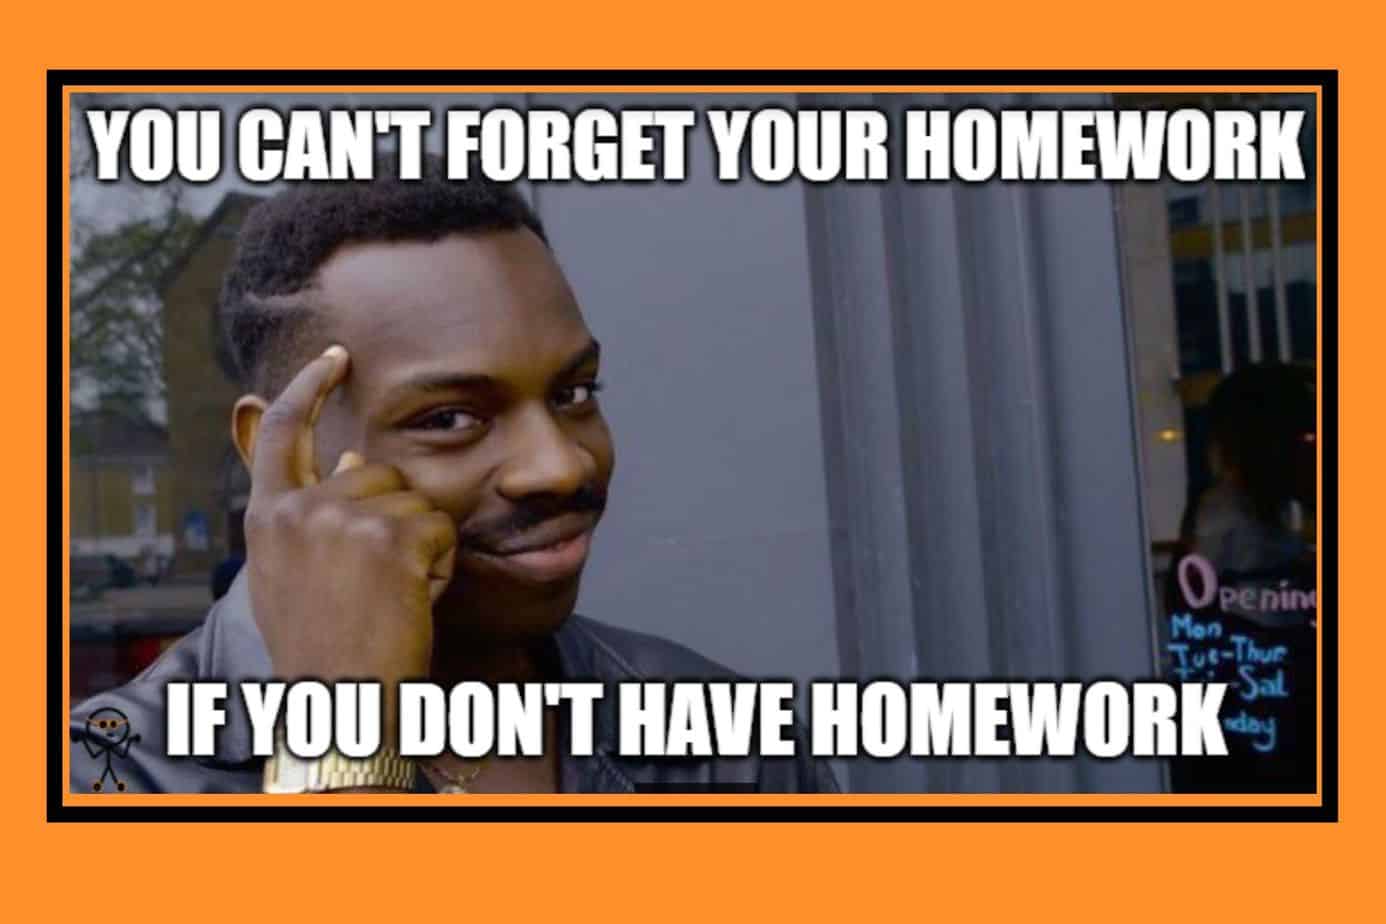 Get some great new homeschooling memes for 2020 here. #homeschoolmemes